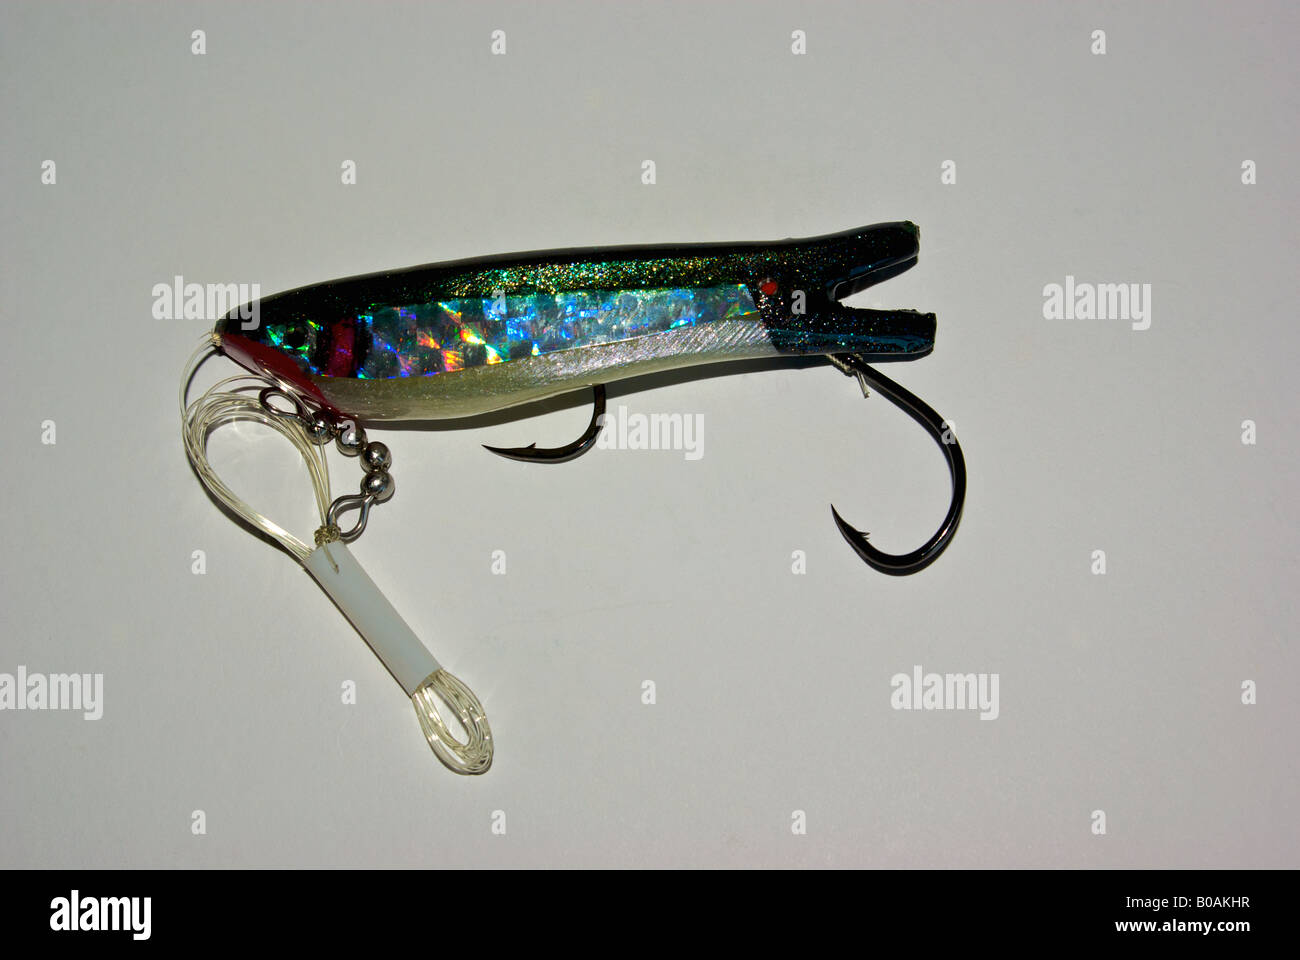 True Roll trolling fishing lure attracts salmon bottom fish and trout Stock  Photo - Alamy